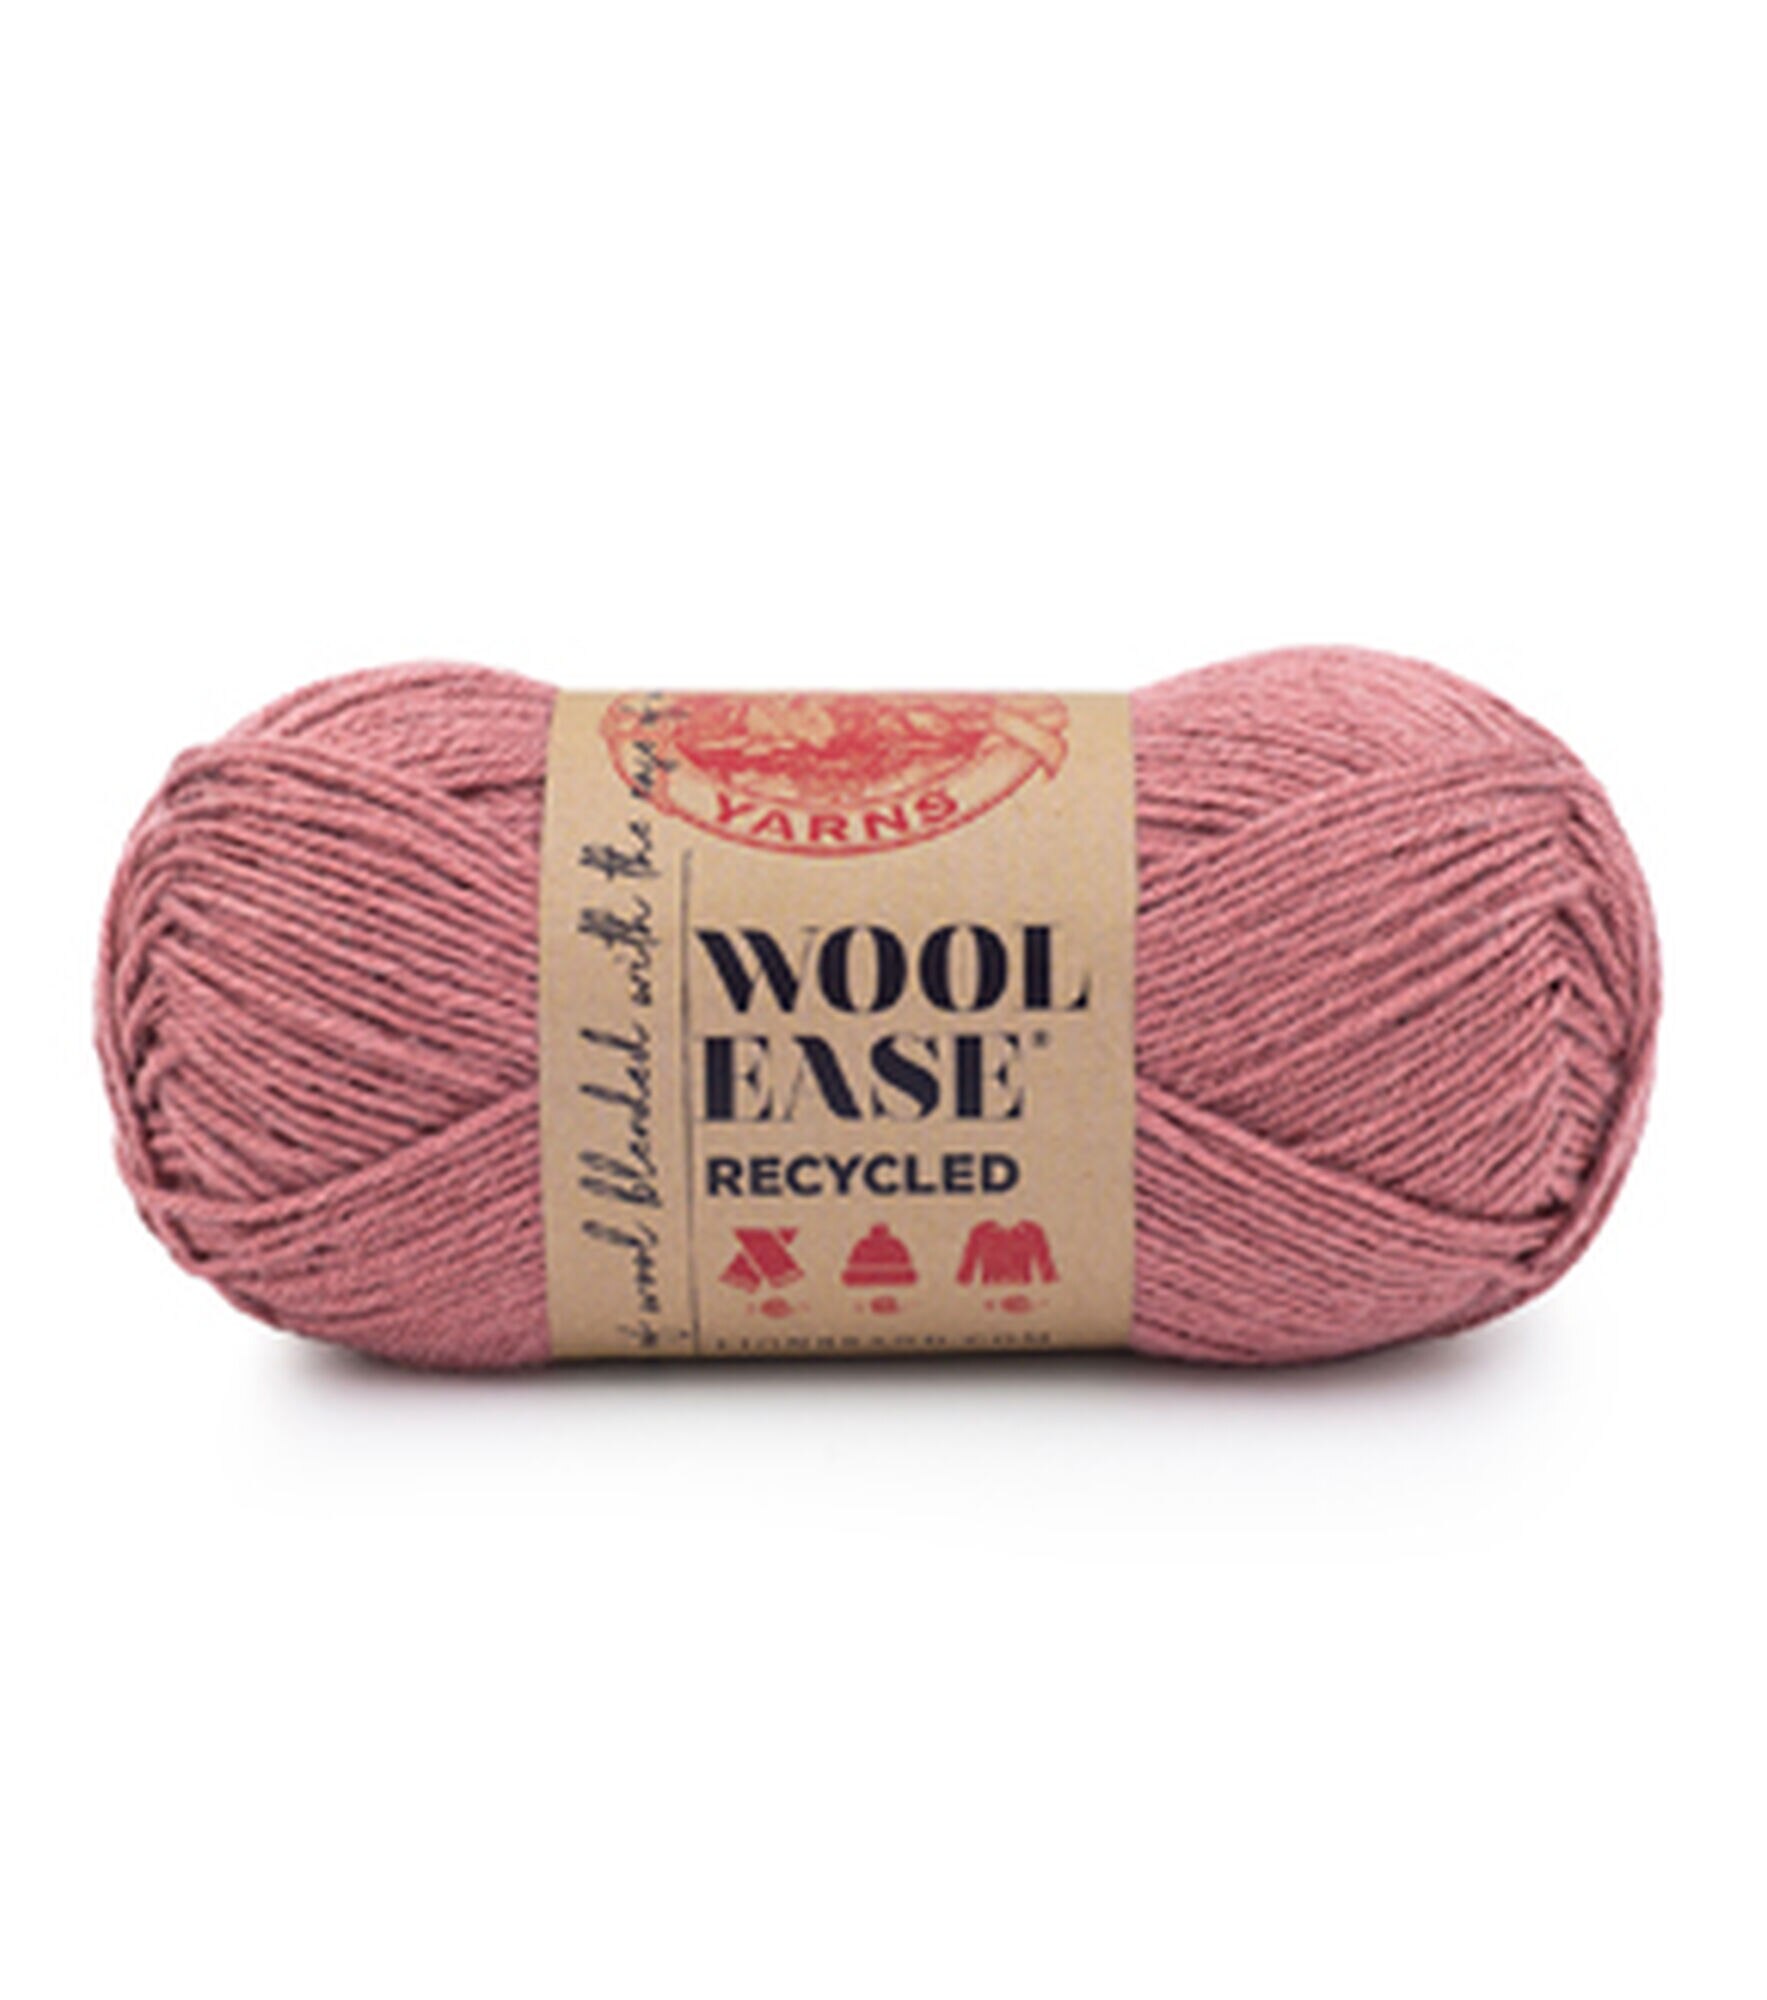 Lion Brand Wool Ease Recycled Natural 196yds Worsted Wool Blend Yarn, Terracotta, hi-res